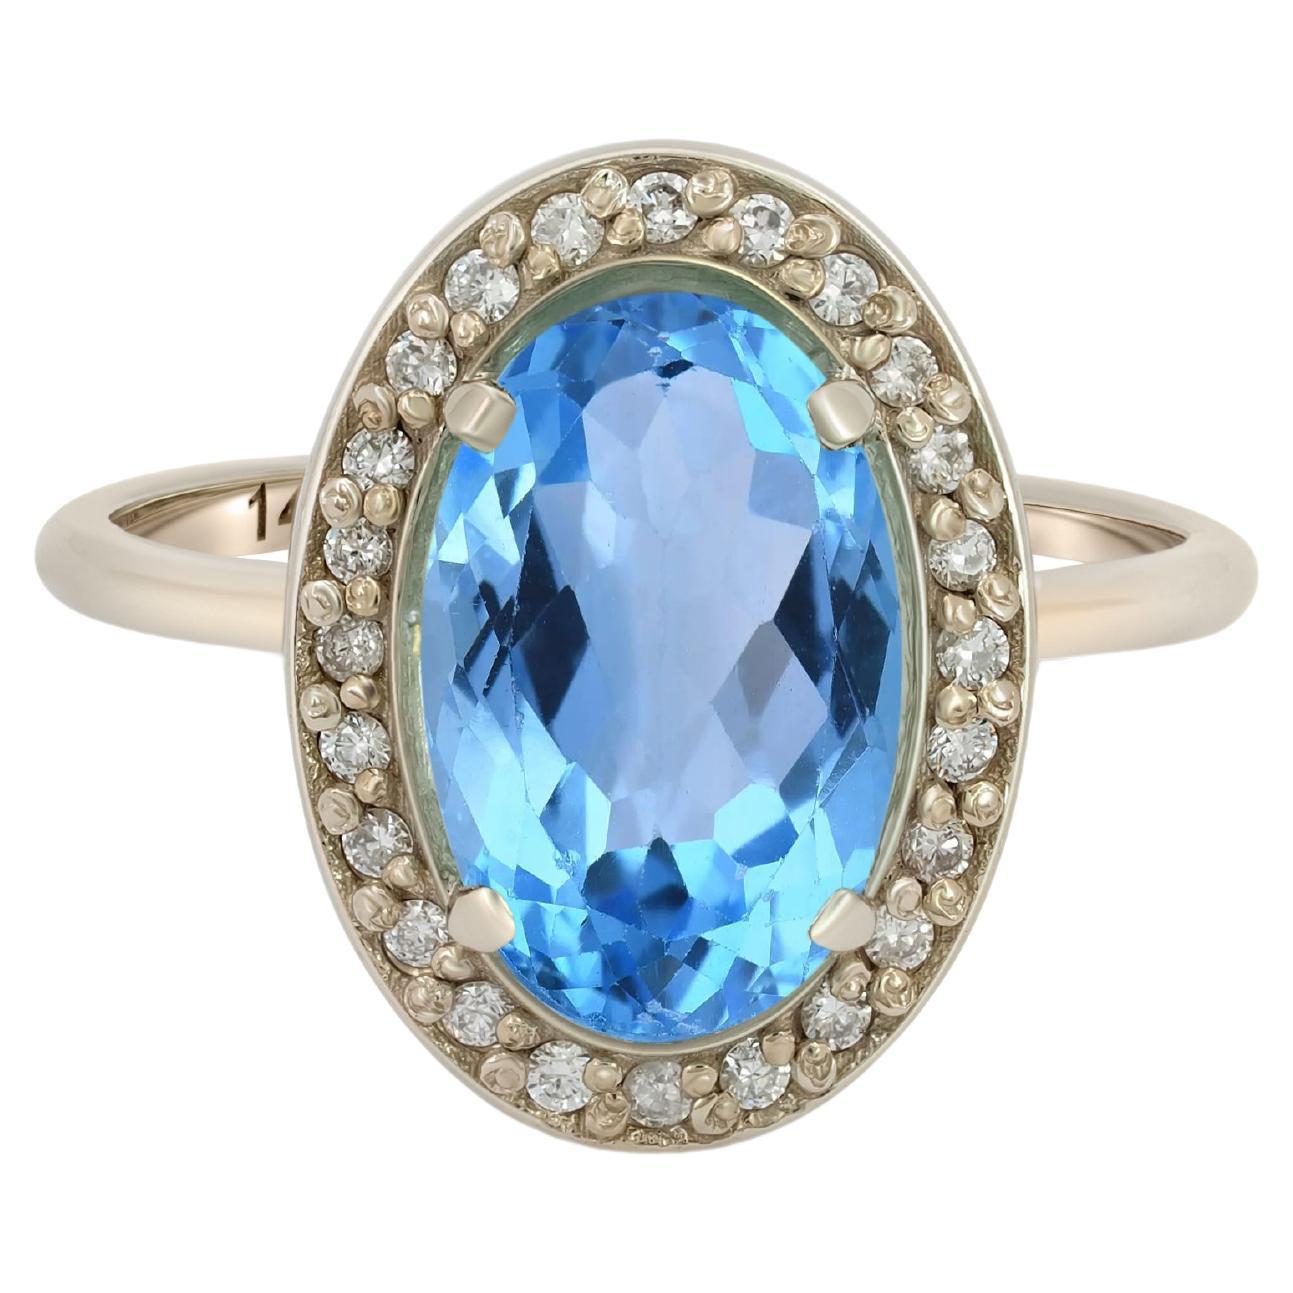 For Sale:  Topaz and diamonds 14k gold ring.